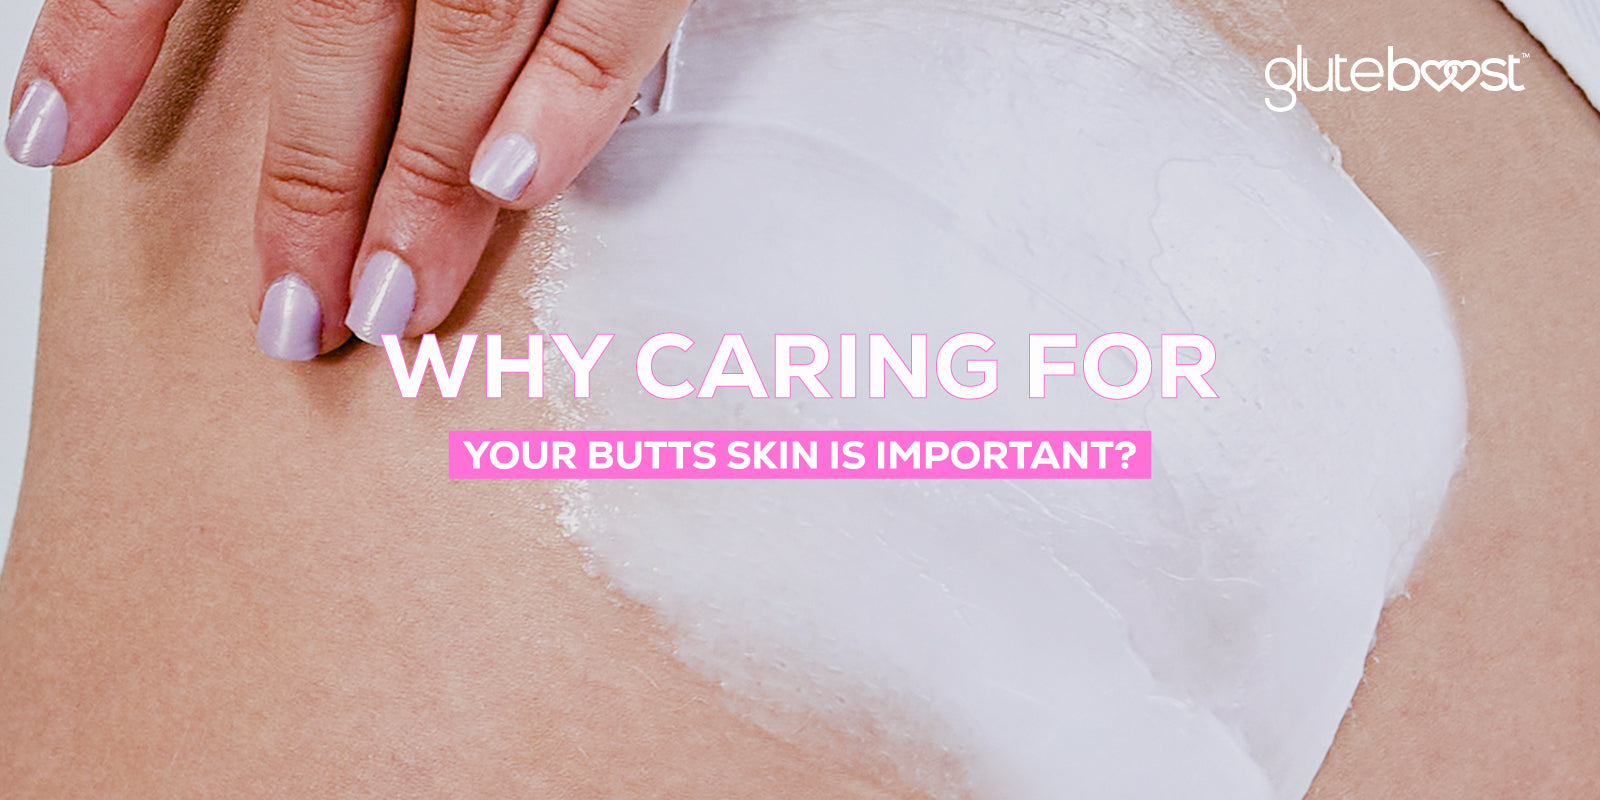 Why caring for your Butts skin is important